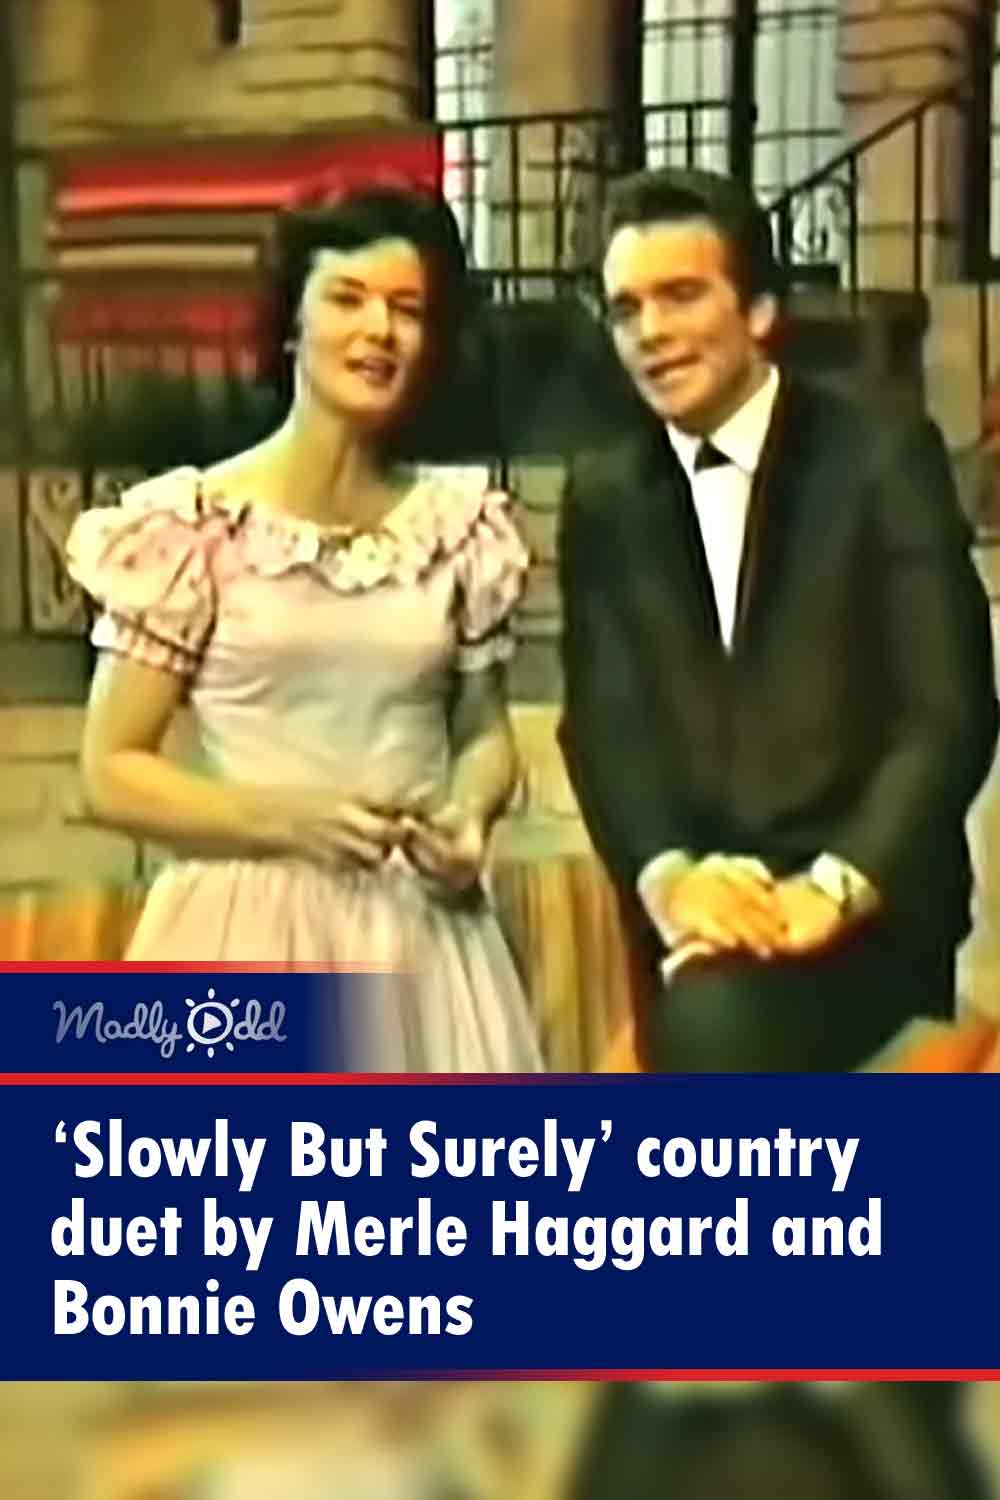 ‘Slowly But Surely’ country duet by Merle Haggard and Bonnie Owens